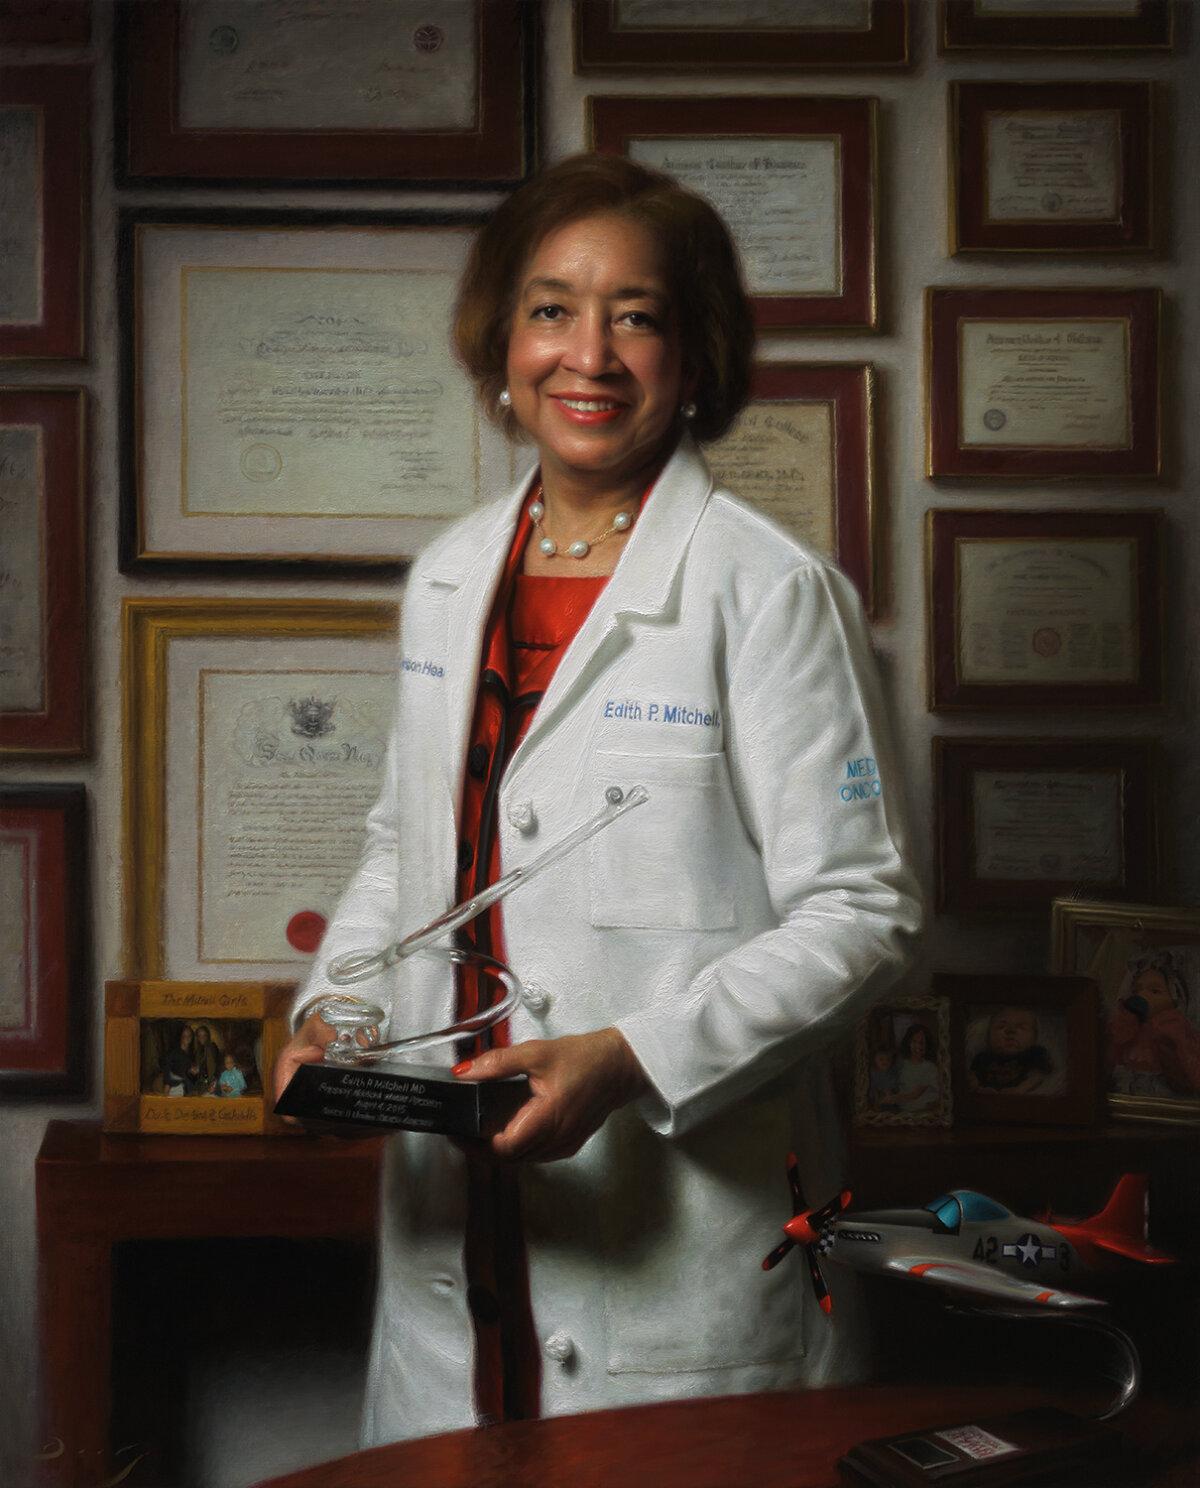 “Dr. Edith P. Mitchell, MD” by Joseph Q. Daily of New York City. Oil on linen; 47 inches by 38 inches. (Courtesy of the Portrait Society of America)